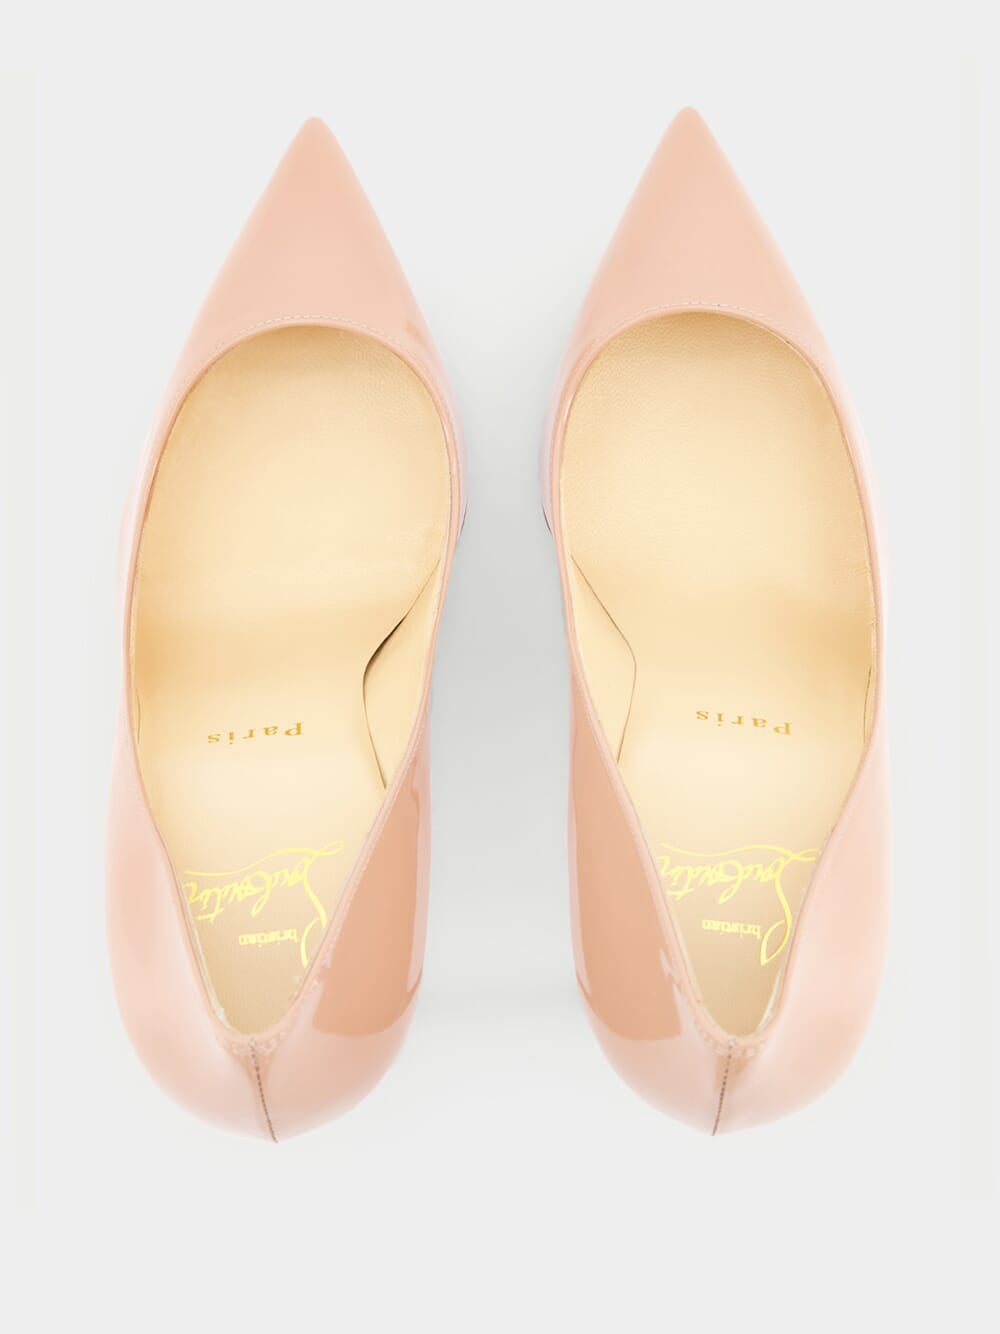 Pigalle Follies 100mm leather pumps